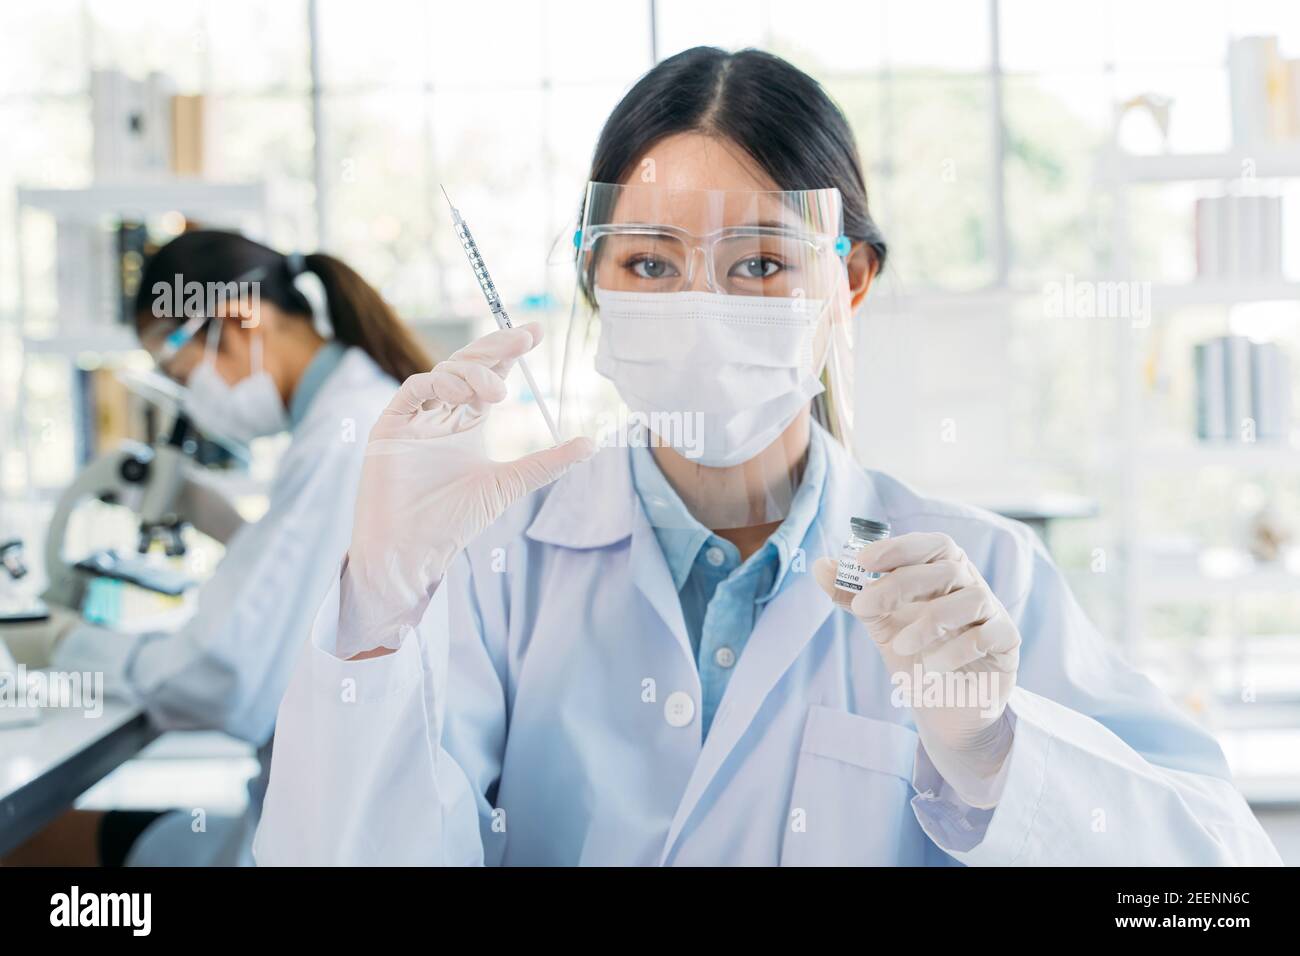 Successful young female medical researcher and scientist wearing labcoat standing in laboratory while working on developing covid-19 vaccine holding injection and bottle Stock Photo